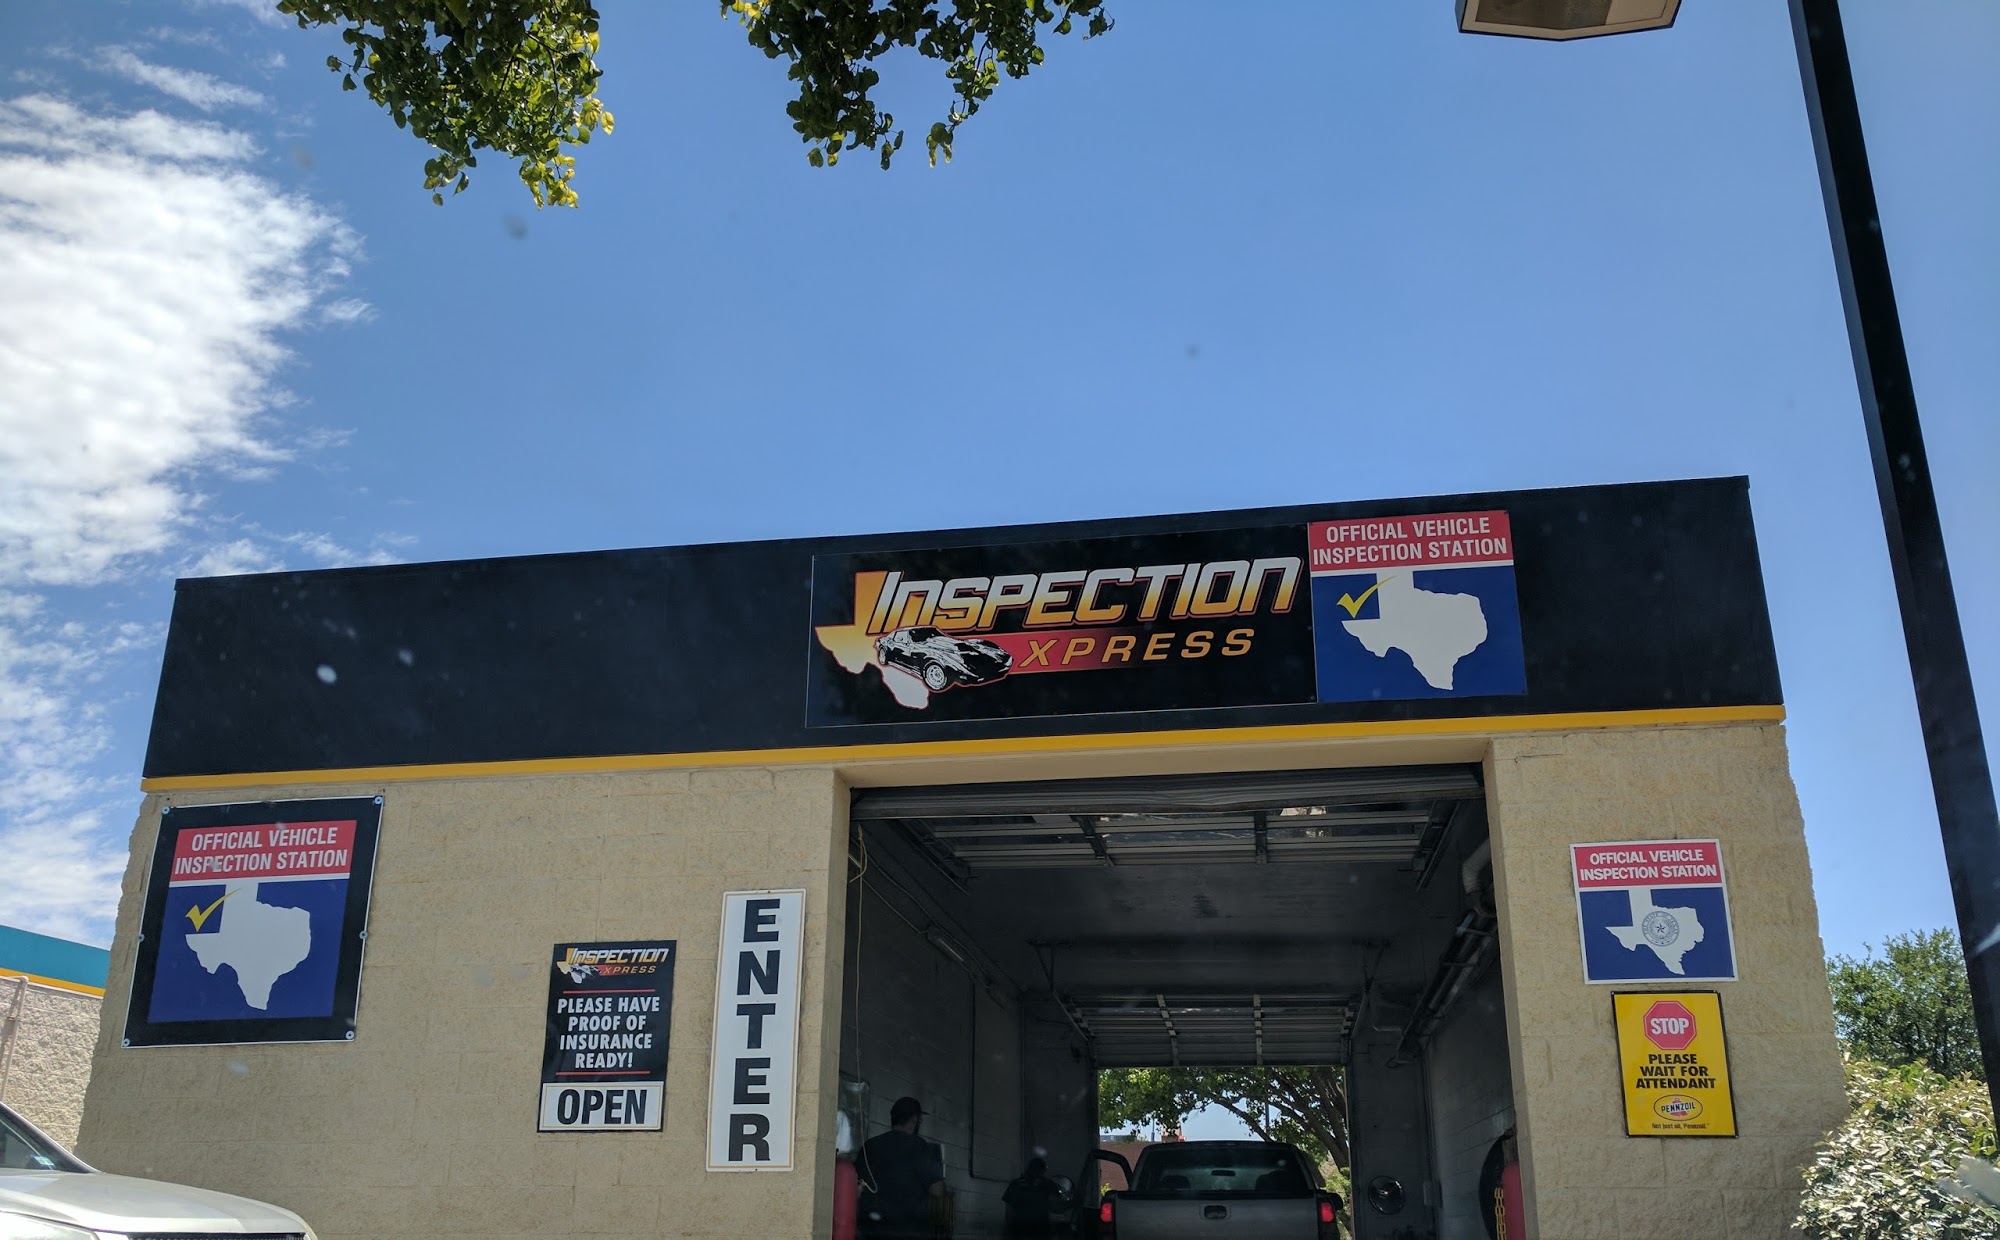 Inspection Xpress